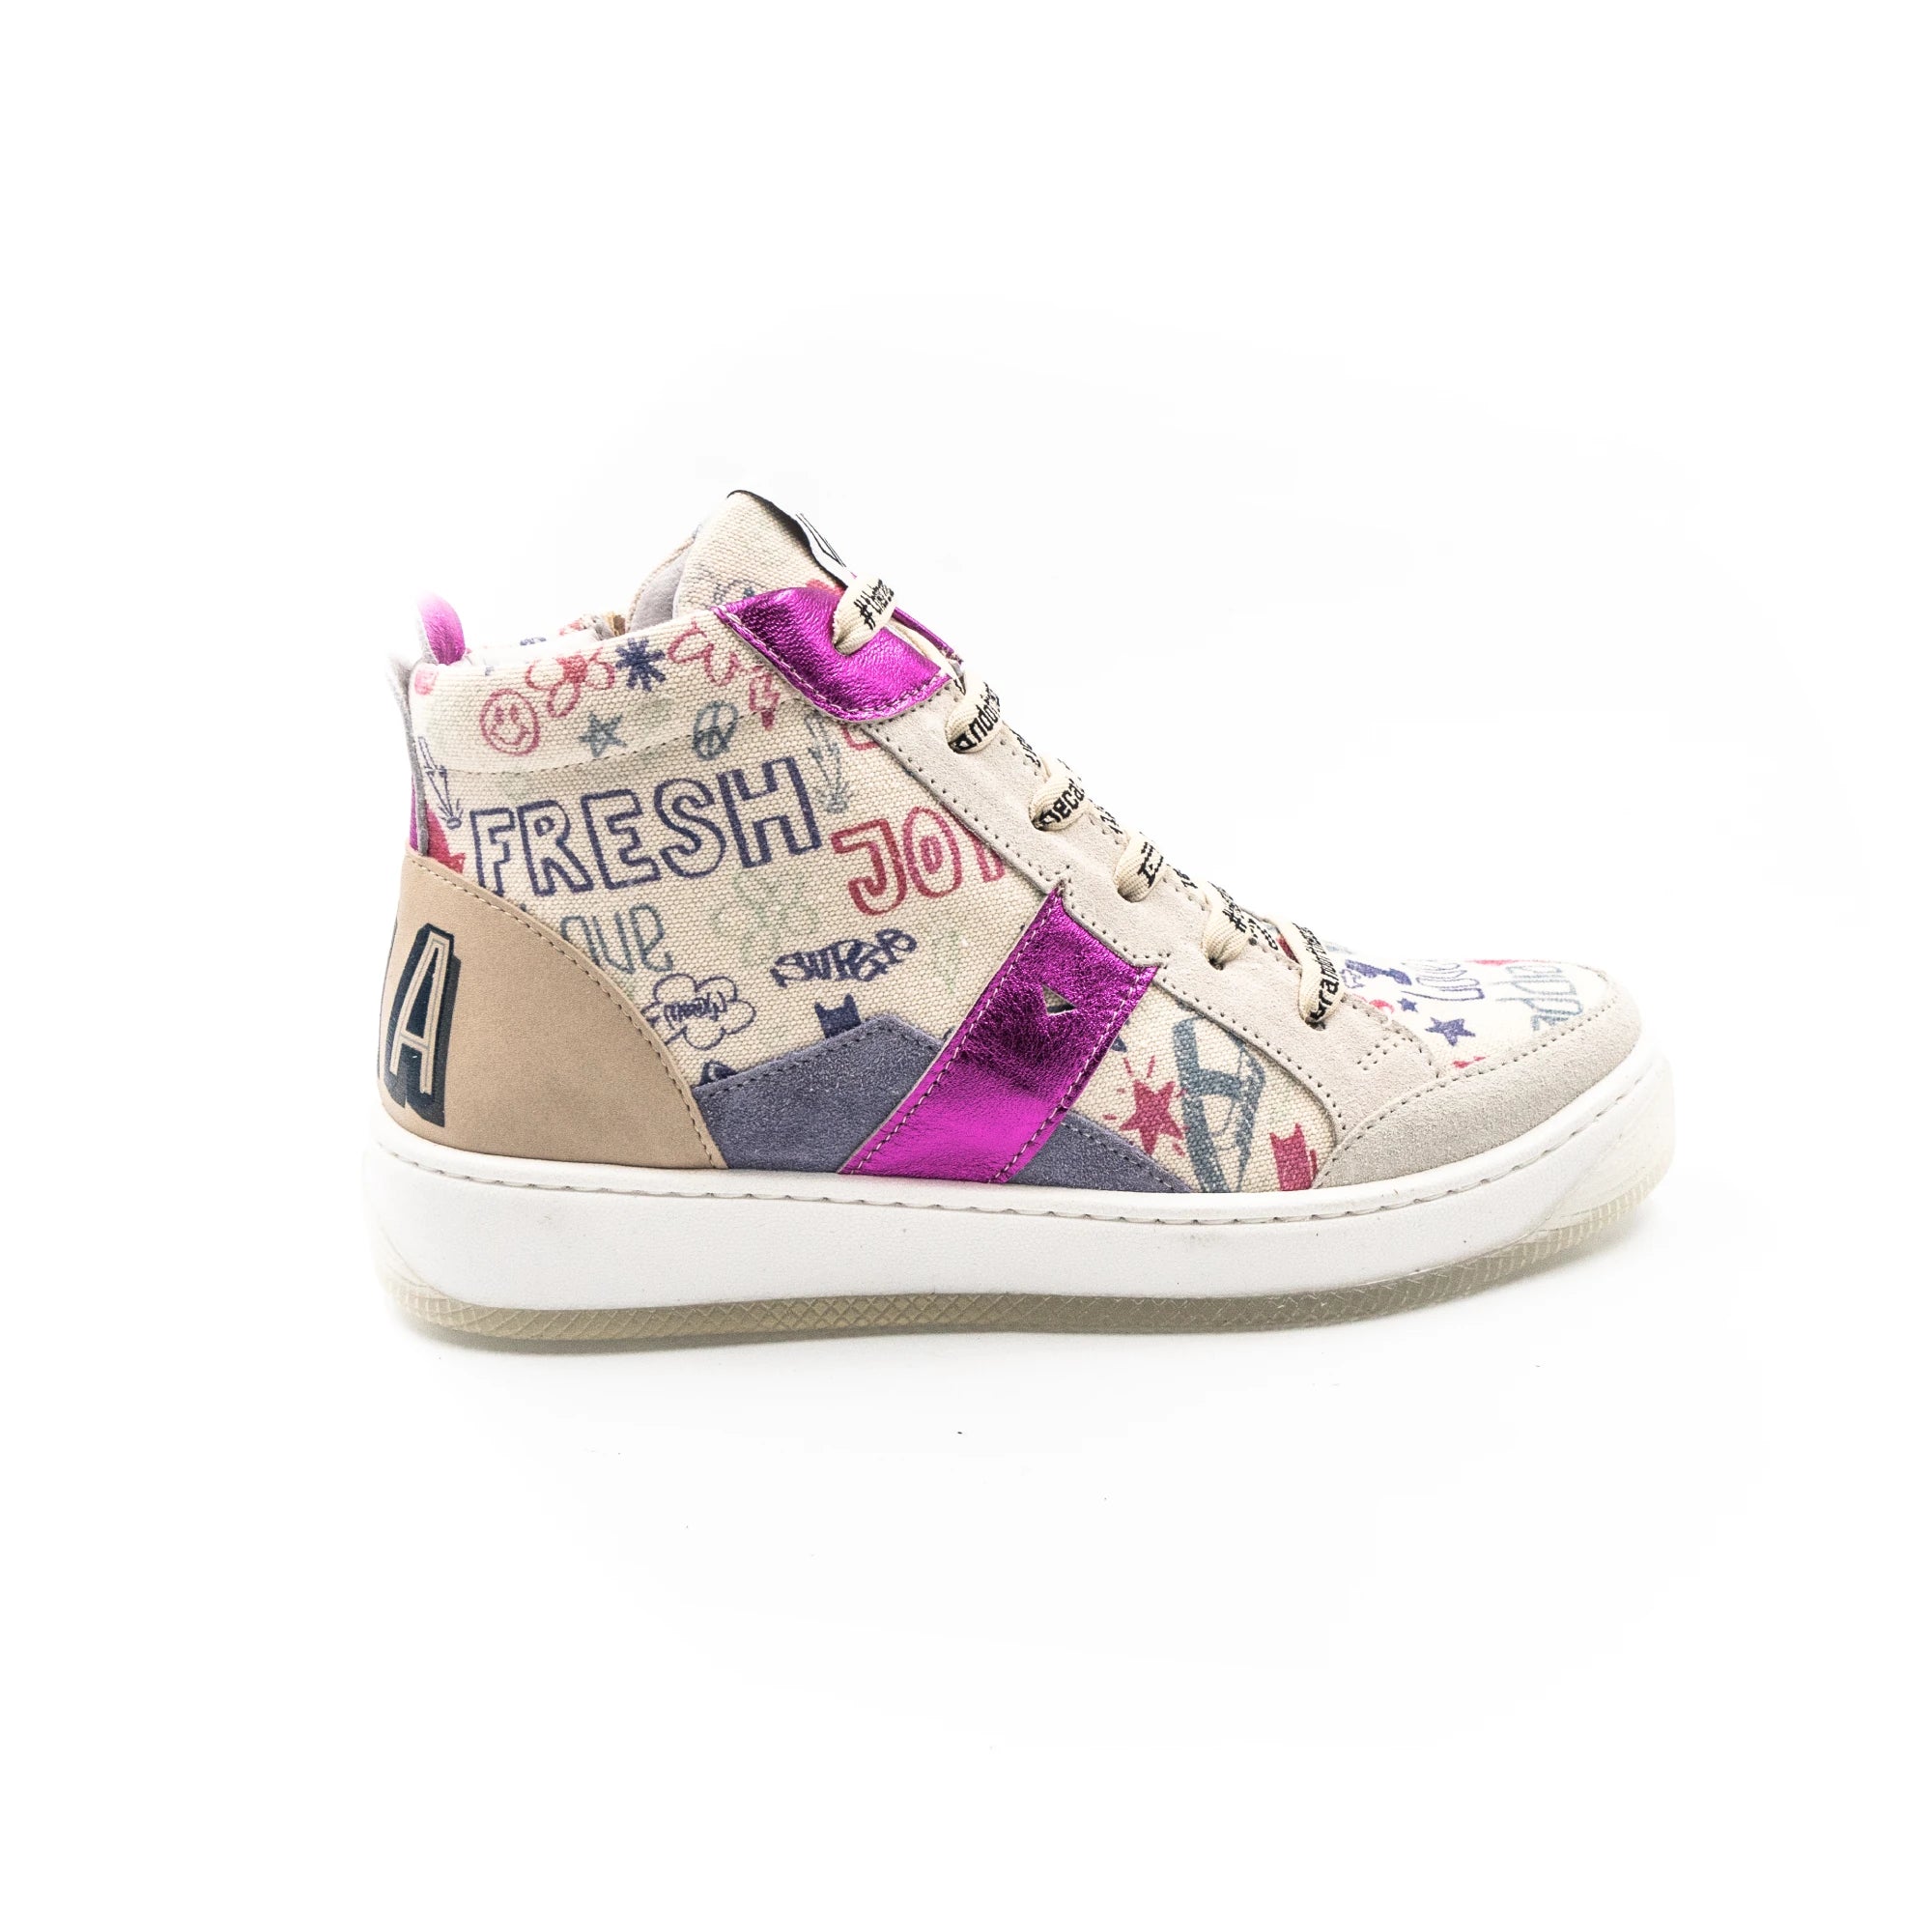 Shoes with hand-drawn designs.